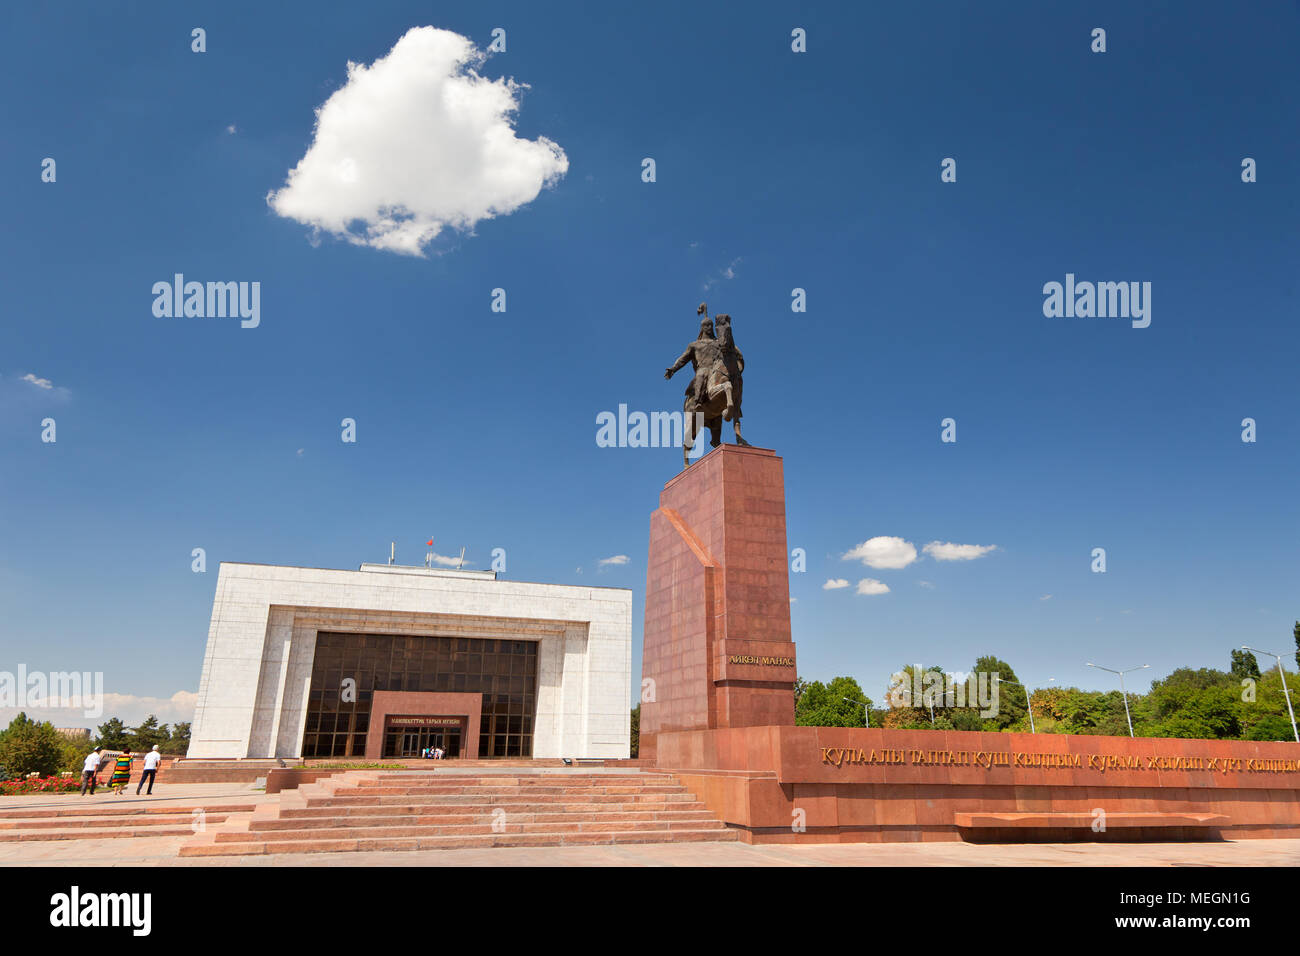 View of the building of the Kyrgyz State Historical Museum and the monument to the hero of the national epic Manas in Bishkek city, Kyrgyz Republic Stock Photo